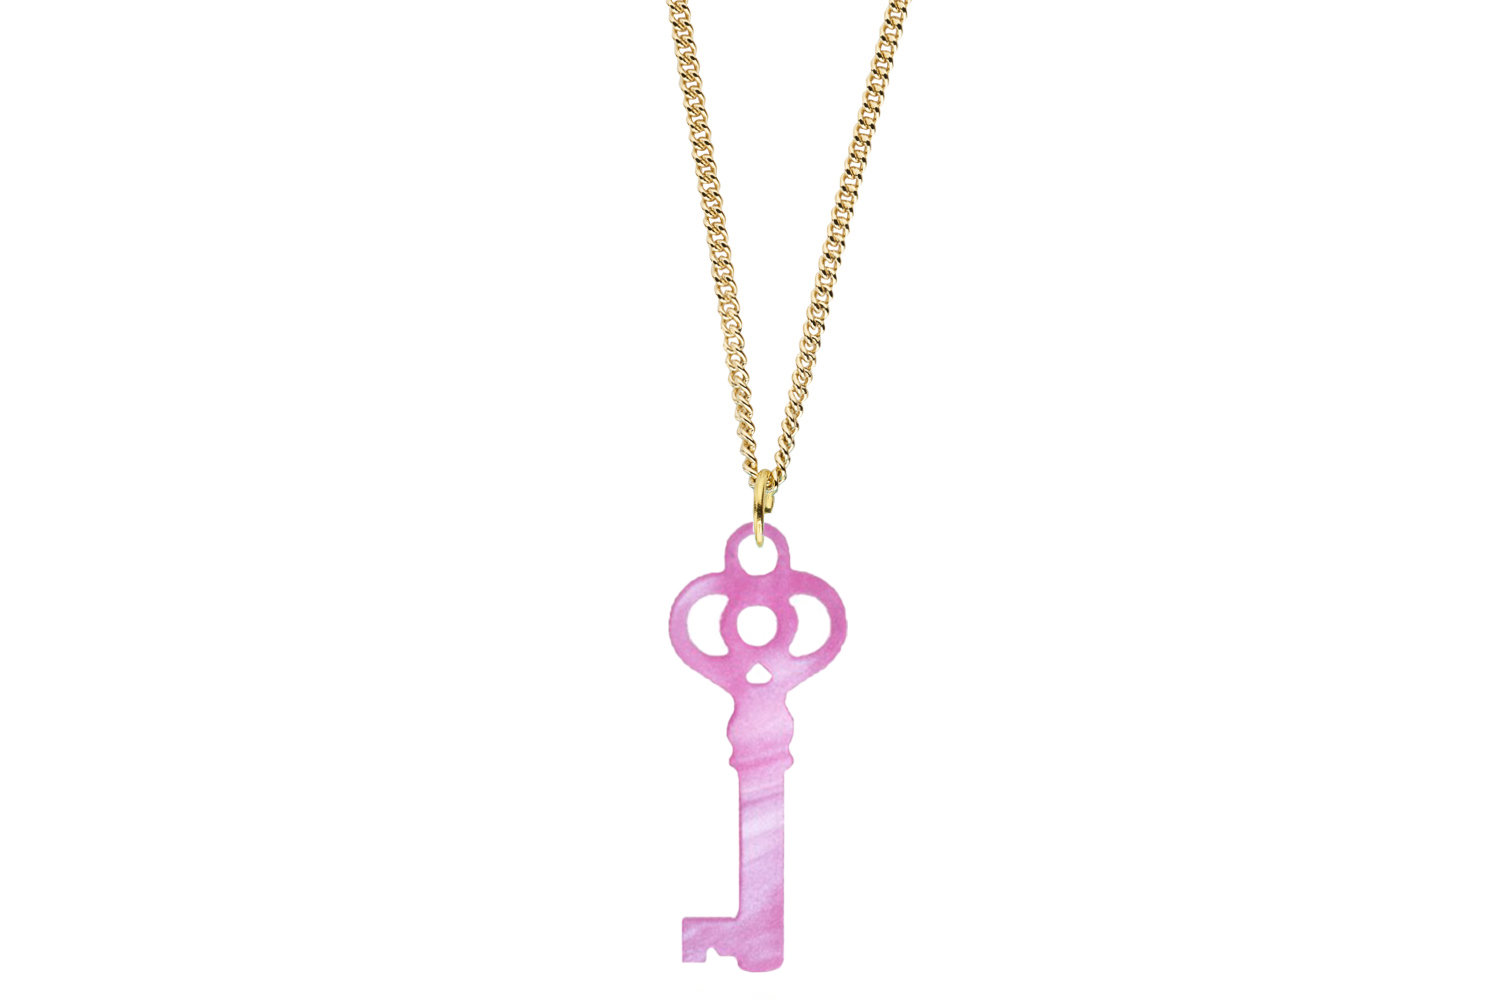 Key Pendant Sculpted Style on Chain Necklace